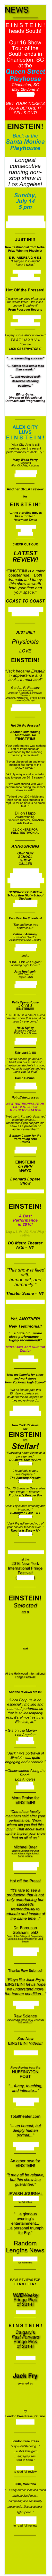 NEWS
_________

New testimonials are 
POURING IN!!
(Just Scroll South)

EINSTEIN!

Back at the
Santa Monica Playhouse 


24 consecutive
sold out shows!

Tuesday, 
September 26
8:00pm

CLICK HERE FOR TICKETS



____________

JUST IN!!! 

New Testimonial from Nobel Prize Winning Physicist
 D R.  ANDREA G H E Z
“I enjoyed it so much! 
I saw it twice.”

C L I C K  H E R E  
FOR FULL
T E S T  I M O N I A L
____________ 

Hot Off the Presses!

“I was on the edge of my seat the whole time!... We’ll see you on Broadway!”
From Passover Resorts

C L I C K  H E R E  
FOR FULL
T E S T  I M O N I A L
____________ 

Hugely successful Fundraiser!
T E S T I  M O N I A L
from the 
LICK OBSERVATORY!

“... a resounding success”

“... tickets sold out in less than a week.”

“... and received well-deserved standing ovations.”


Elinor Gates, 
Director of Educational Outreach and Programming

Click here for 
full testimonial

____________

ALEX CITY
LUVS
E I N S T E I N !

“Alex City Arts is still
reeling over the recent
performances of Jack Fry.”

Mary Wood Perry
President
Alex City Arts, Alabama

Click here for 
full testimonial

___________

Another GREAT review 

for

E I N S T E I N ! 
 
“... the storyline moves 
like a thriller.”
Hollywood Times

CLICK HERE
for the 
full review
___________

CHECK OUT OUR 

LATEST
REVIEW!

“EINSTEIN! is a roller coaster ride... Both 
dramatic and funny, this show is worth 
both your time and 
your space.”

COAST TO COAST

CLICK HERE FOR FULL REVIEW

____________


JUST IN!!!!

Physicists 

LOVE

EINSTEIN!

“Jack became Einstein in appearance and soul... a must see!”

Gordon P. Ramsey
Past President
American Association of Physics Teachers,
Emeritus Professor of Physics, Loyola University Chicago

CLICK HERE FOR 
FULL TESTIMONIAL

____________


Hot Off the Presses!

Another Outstanding Testimonial for 
EINSTEIN!

“Your performance was nothing sort of tremendous as evidenced by the standing ovation you received.” 
“I even observed an audience member fist-pump at the show’s climax.”

“A truly unique and wonderful way to open our 2019 season.”

“We were thrilled with your performance during the school show as well.”

“To hold over 200 middle and high school age students in rapture for an hour is no small feat...”

Dillon Hupp
Award winning, 
Executive Director, ACANSA Arts Festival

CLICK HERE FOR 
FULL TESTIMONIAL

____________

ANNOUNCING

OUR NEW 
SCHOOL
SHOW 
CALLED

“EINSTEIN! IMAGINATION ENCOMPASSES THE WORLD”

DESIGNED FOR Middle School thru High--School Students
LEARN MORE 
ABOUT IT HERE

____________

Two New Testimonials!

“The audience was enthralled..!”

Debra J’Anthony
Executive Director
Academy of Music Theatre

Click here for 
full testimonial

and...

“EINSTEIN! was a great opening night for us!”

Jane Hochstein
JCC Director
Dayton, JCC

Click here for 
full testimonial

_____________


Pella Opera House
L O V E S 
EINSTEIN!!!!

“EINSTEIN! is a one of a kind one man show that should be seen by everyone.”

Heidi Kelley
Executive Director
Pella Opera House

Click here for 
full testimonial
_____________

This Just in !!!!

“You’re actions go hand-in-hand with our mission of shaping our students in strong and versatile scholars and we thank you for that!”

Camp DaVinci

Click here for
full testimonial
_____________

Hot off the presses

NEW TESTIMONIAL FROM BIGGEST JCC IN 
THE UNITED STATES!

“Well worth it... well- deserved standing ovation... I recommend you support this show as a presenter or audience member.”

Berman Center for the Performing Arts
Detroit 

Click here for 
full testimonial
_____________

EINSTEIN!
on NPR
WNYC

Leonard Lopate Show

CLICK HERE TO LISTEN

_____________

Einstein!

A Best
Performance 
in 2016!

Judged in the 2016 NY Fringe Festival

DC Metro Theater Arts ~ NY

Click here for full review

_____________

“This show is filled with
humor, wit, and humanity.”

Theater Scene ~ NY

Click here for full review

_____________


Yet, ANOTHER!

New Testimonial!

“... a huge hit... world class performance... Highly recommend!”

Mitzel Arts and Cultural Center

Click here 
for full testimonial

_____________

New testimonial for show and workshops
from Yorktown High School! 
“We all felt the pain that Einstein experienced...
students will be inspired as they move forward... 
CLICK HERE
for full testimonial
_____________

New York Reviews
for
Einstein!
are
Stellar!
“Everything about Einstein! is pure genius.”
DC Metro Theater Arts
(click here)

“I found this to be a masterpiece.”
The Amazing Kreskin
(click here)

“Top 10 Shows to See at New York Fringe. ~ Einstein!”
Producer’s Perspective
(click here)

“Jack Fry is both amusing and intriguing.”
Huffington Post ~ NY
(click here)

“Jack Fry will remind you of your coolest teacher ever .”
Theater is Easy ~ NY
(click here)

_____________


TOP TEN SHOWS TO SEE

at the 
2016 New York International Fringe Festival!
(click here)

_____________


Einstein!
Selected
as a





and





At the Hollywood International Fringe Festival!

_____________

And the reviews are in!

"Jack Fry puts in an especially moving and nuanced performance that is so inescapably real, it’s almost as if he, Einstein, is."

~ Gia on the Move~
Los Angeles
Click here
for full review
_____________

“Jack Fry’s portrayal of Einstein was quite engaging and eccentric.”

~Observations Along the Road~
Los Angeles
Click here
for full review
_____________

More Praise for EINSTEIN!

“One of our faculty members said after your performance, “Wow, where did you find this guy!”  That about sums up the impact your show had on all of us.”

Michael Baer
Science Department Chair
South Adams High School, 
Berne Indiana

CLICK HERE
for full testimonial
_____________

Hot off the Press!

“It’s rare to see a production that is not only entertaining but succeeds tremendously to educate and inspire at the same time...”

Dr. Forouzan Golshani, phD
Dean of the College of Engineering, California State University of Long Beach

CLICK HERE
for full testimonial

_____________

Thanks Raw Science!

“Plays like Jack Fry’s EINSTEIN! let us hope we understand more the human condition...”

CLICK HERE
for full review

Raw Science
“ADVANCES THAT WILL CHANGE THE WORLD.”

_____________

See New 
EINSTEIN! Video!!!

 CLICK HERE

_____________

Rave Review from the
HUFFINGTON
POST

“... funny, touching,  and intimate...”

CLICK HERE
for full review
_____________

Totaltheater.com

“... an honest, but deeply human portrait...”

CLICK HERE
for full review
_____________

An other rave for
EINSTEIN!

“It may all be relative, but this show is a guarantee.”

JEWISH JOURNAL
CLICK HERE
for full notice
_____________

“... a glorious evening’s entertainment...
...a personal triumph for Fry.”

Random
Lengths News 

CLICK HERE
for full review

_____________


RAVE REVIEWS FOR
E I N S T E I N !


VUEWeekly
Fringe Pick
of 2014!

CLICK HERE
_____________

E I N S T E I N !
Calgary’s 
Fast Forward
Fringe Pick
of 2014! 

CLICK HERE
_____________

Jack Fry
selected as 



by
London Free Press, Ontario
CLICK HERE

_____________


London Free Press
“Fry is outstanding...”
... a slick little gem.
... engaging from 
start to finish.”

CLICK HERE 
to read full review
_____________

CBC, Manitoba
“... a very human look at a much mythologized man... compelling and sensitively presented... flies by at near-light speed. ”
CLICK HERE 
to read full review

_____________










